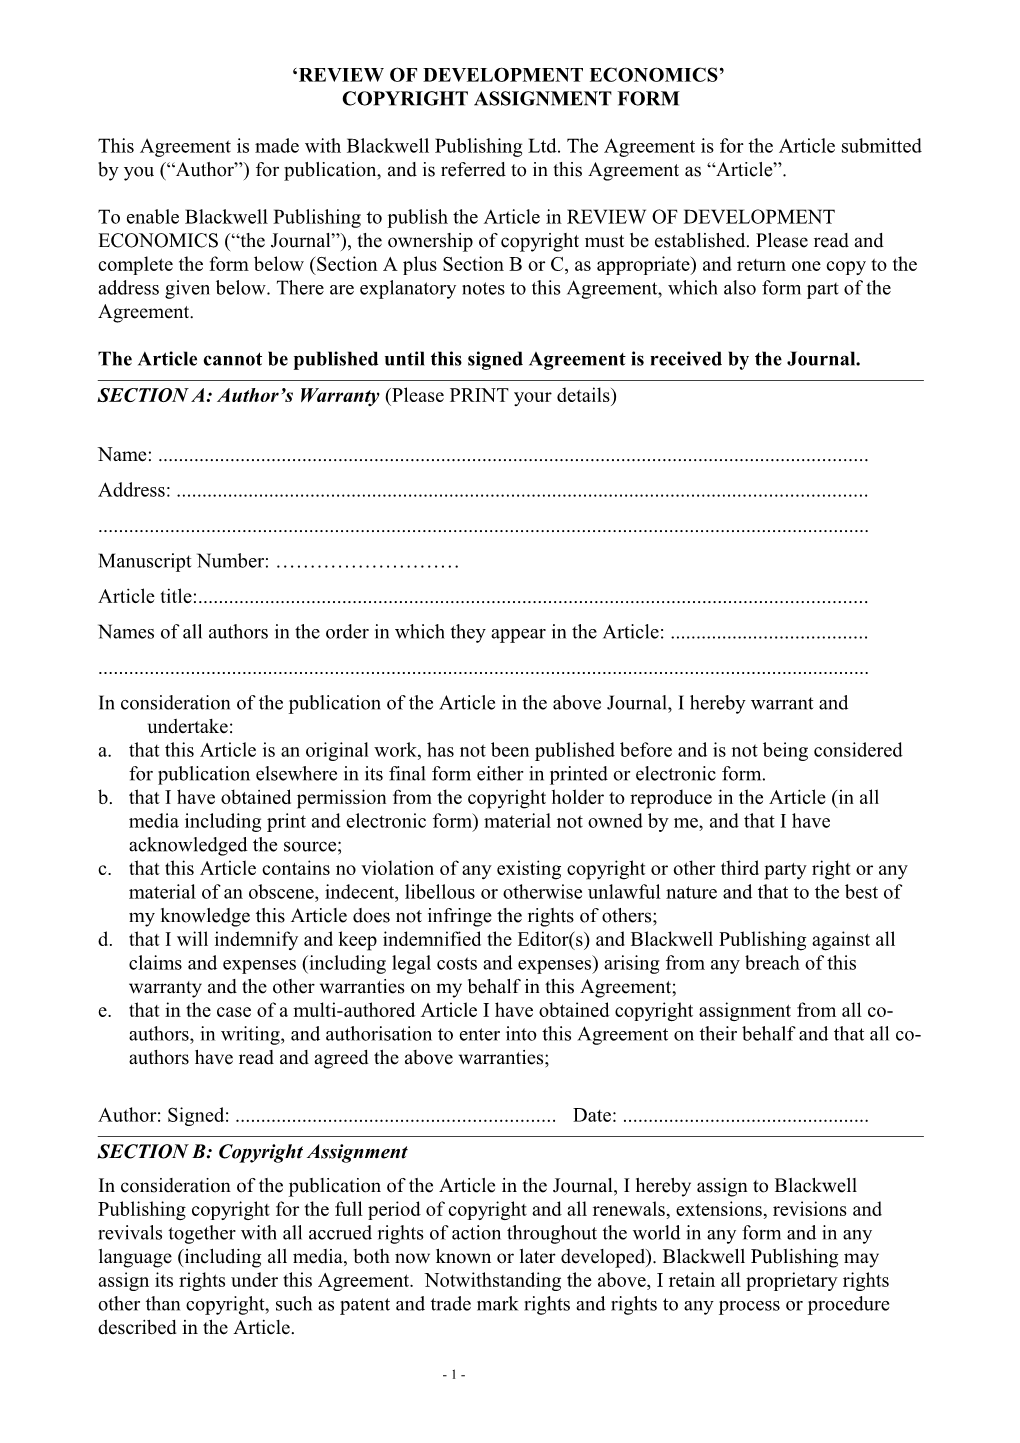 Blackwell Publishing Copyright Assignment Form